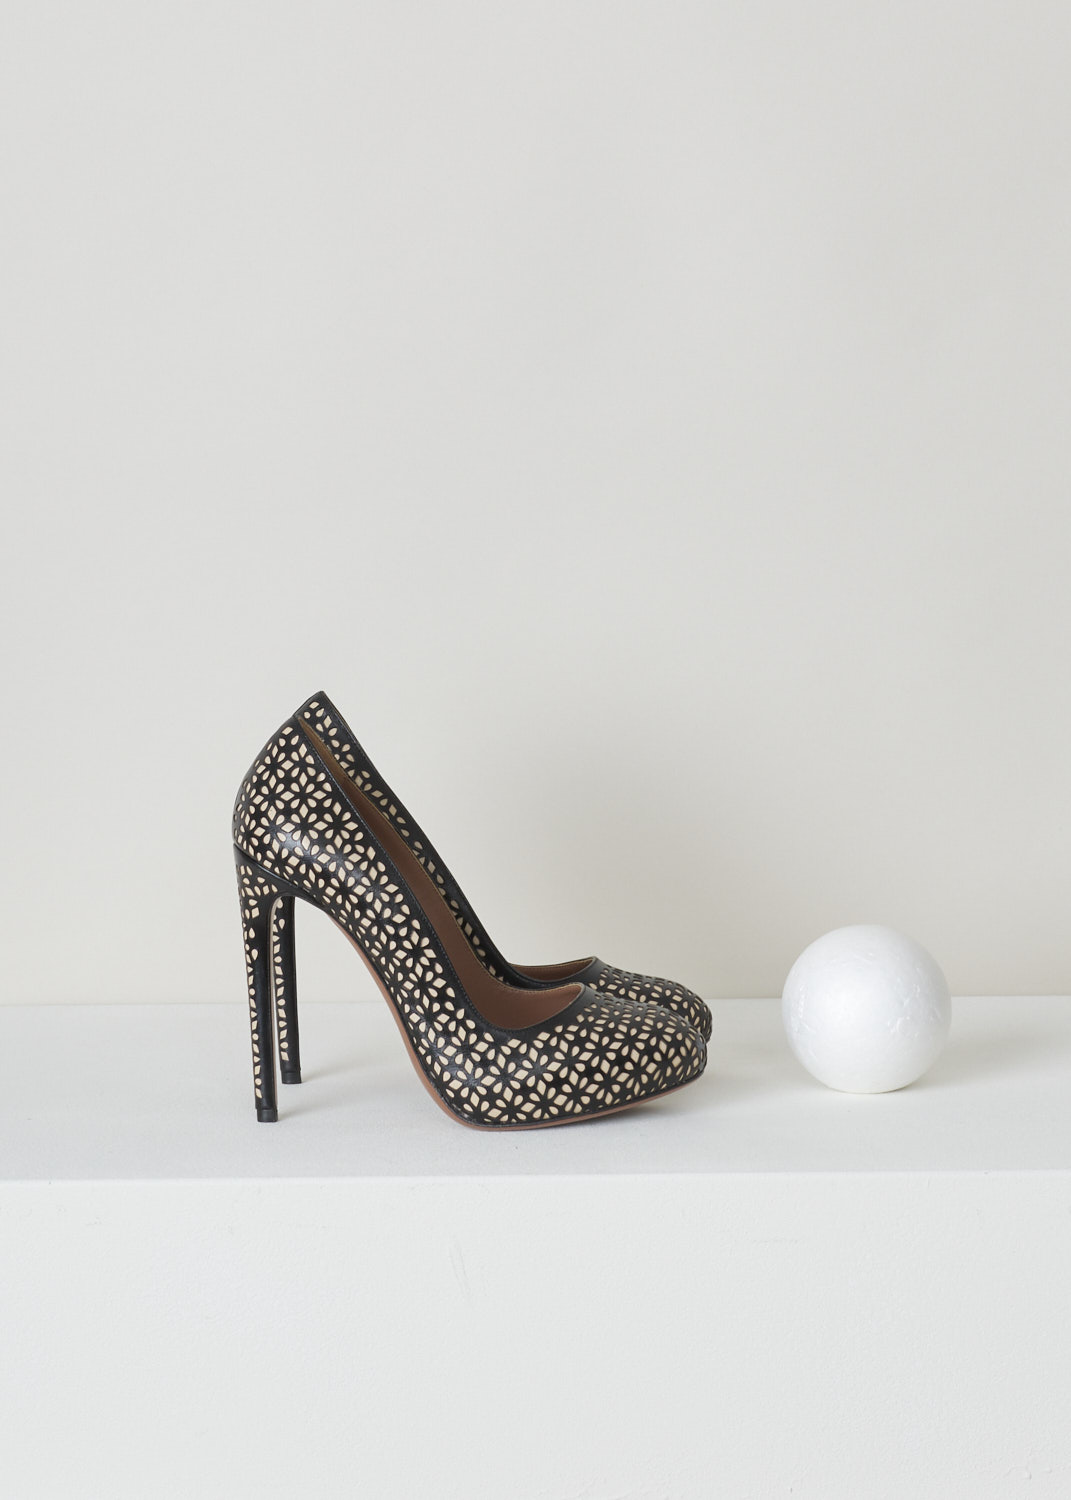 Alaïa, Black high heeled laser-cut pump, 3S2I013CE01_noir_roche_C950, black, side, Lovely high heel pumps comes in a two-tone colour palette, being the beige background colour which is adorned with this black signature laser-cut Vienne motif on top. Furthermore, this model has a rond nose and black trimmed topline. 

Heel height: 11 cm / 4.3 inch. 
